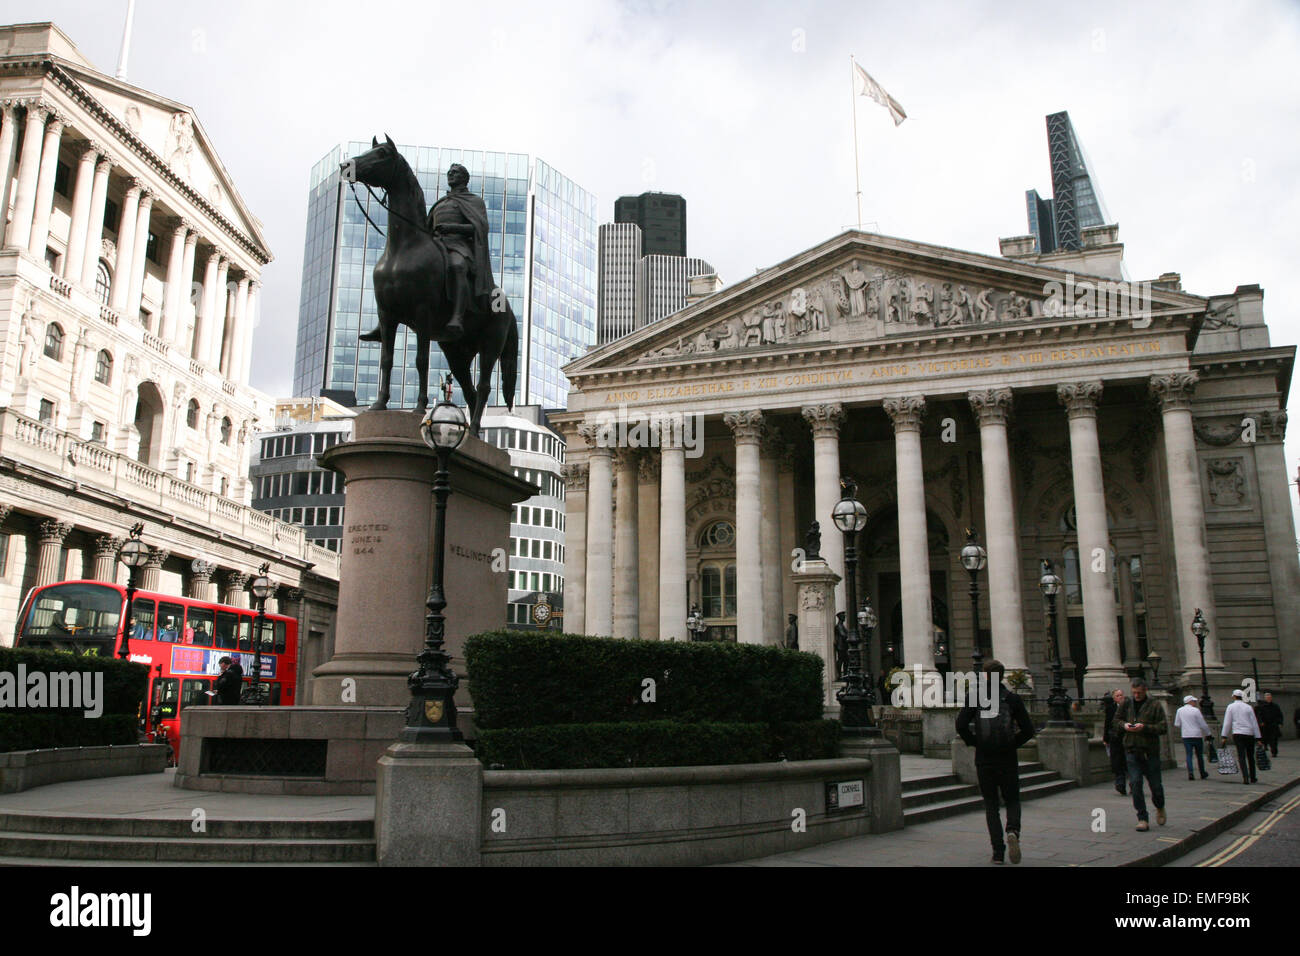 Duke of Wellington Equestrian Statue, The Royal Exchange, City of London, with local commuters, England, UK. Stock Photo